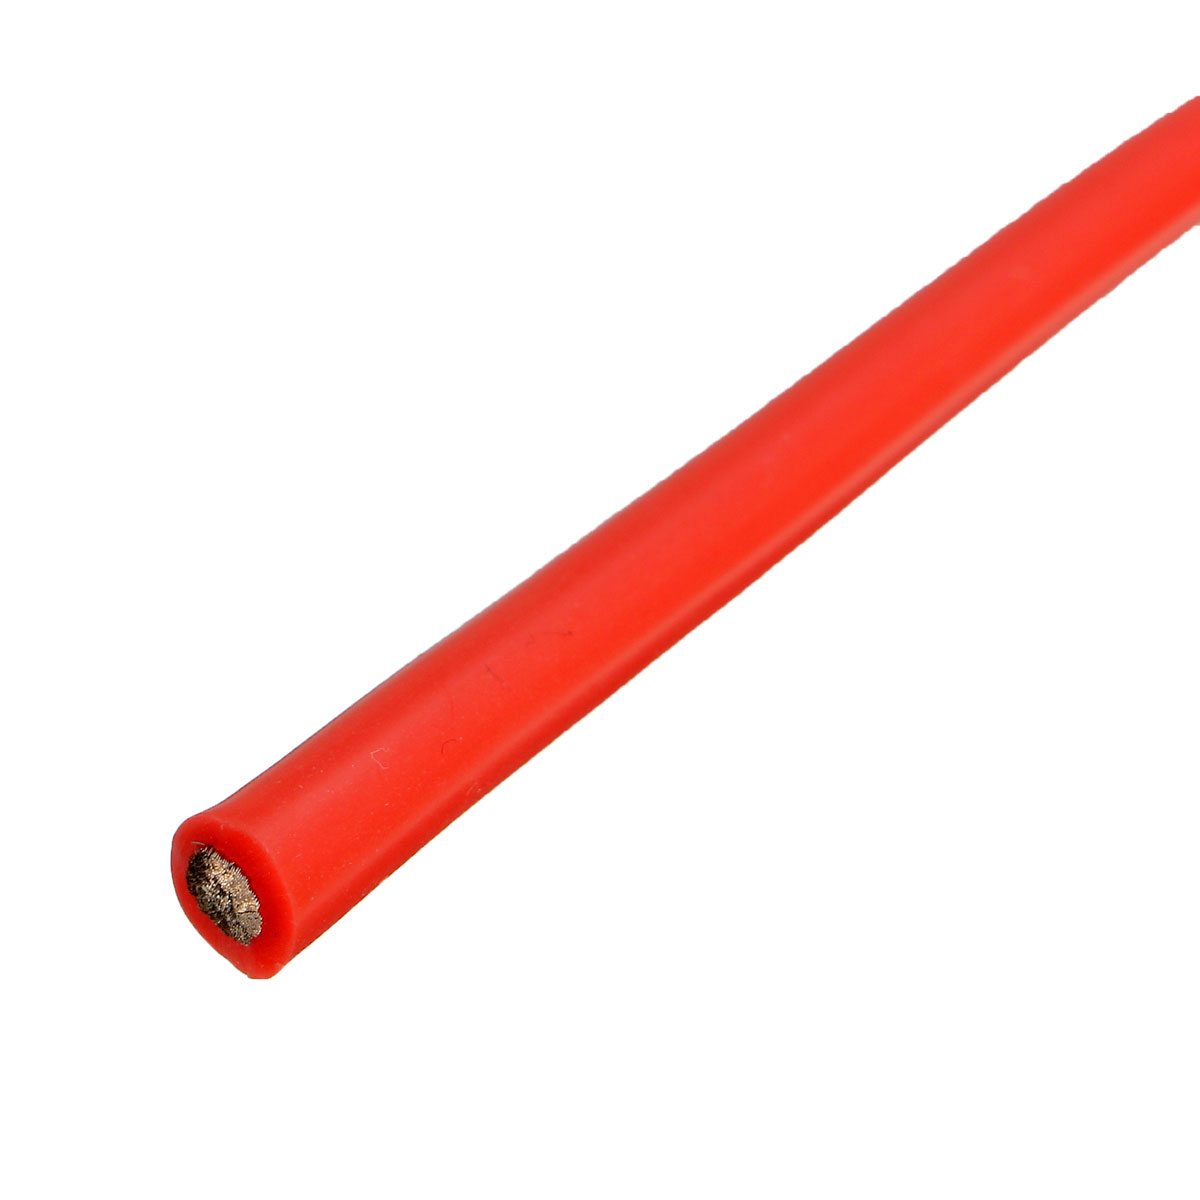 DANIU-2-Meter-Red-Silicone-Wire-Cable-10121416182022AWG-Flexible-Cable-1170284-7